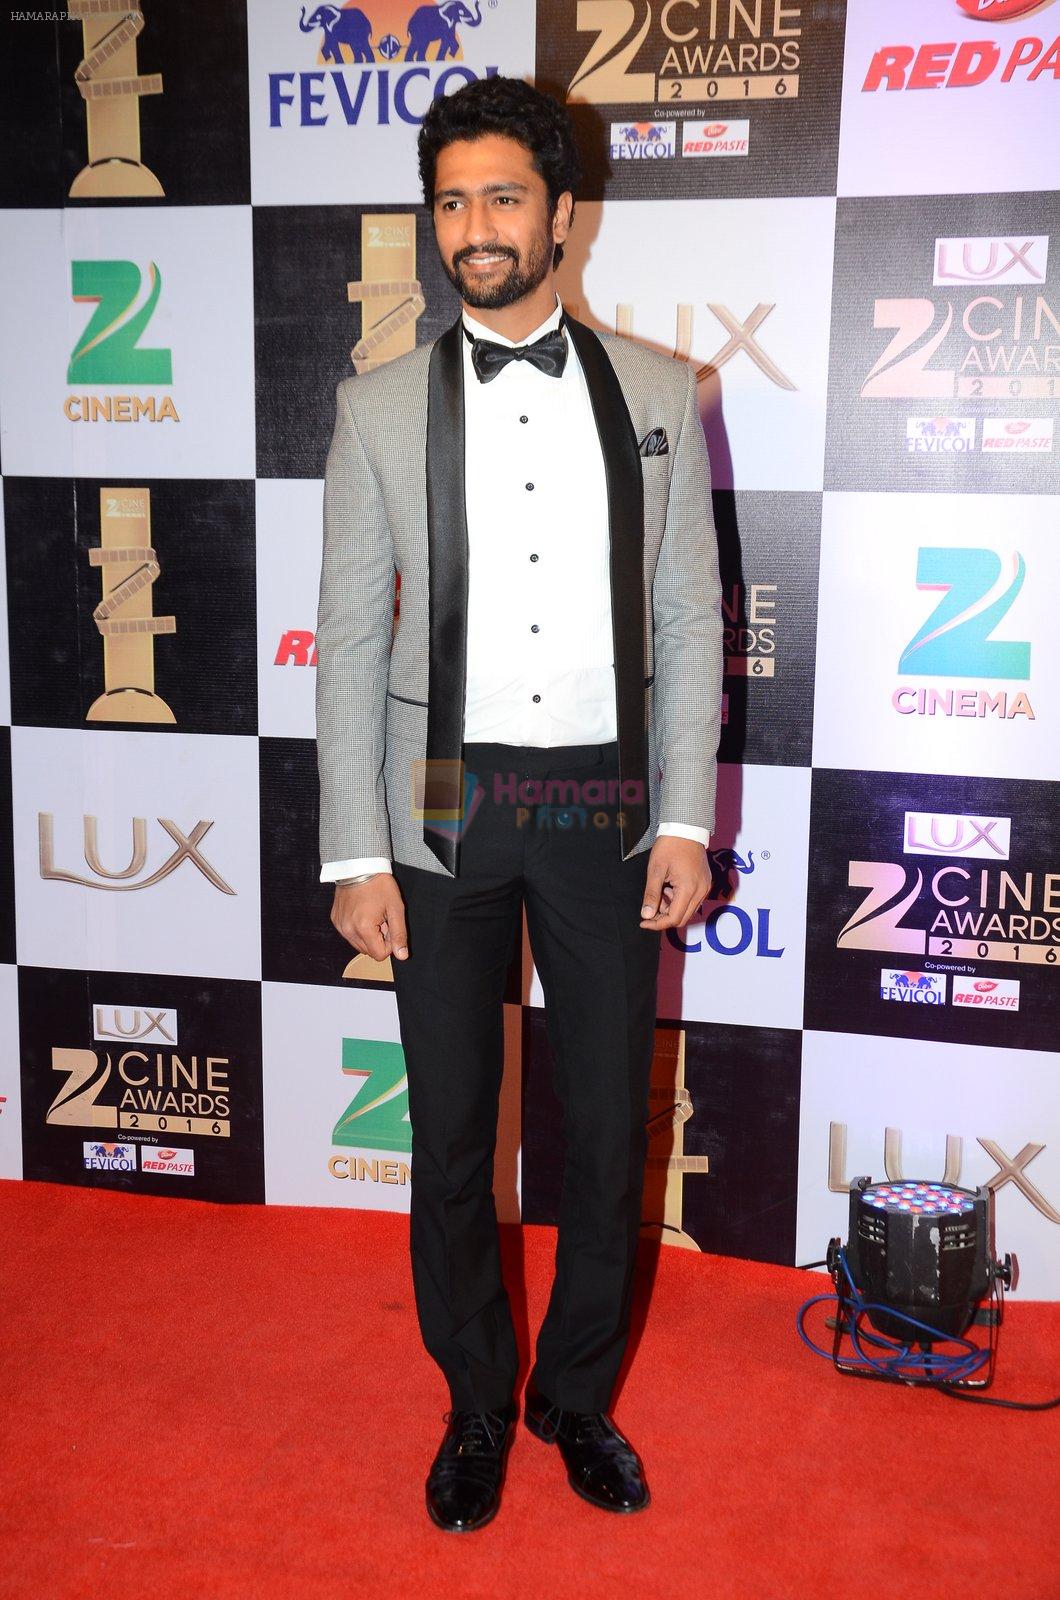 Vicky Kaushal at zee cine awards 2016 on 20th Feb 2016